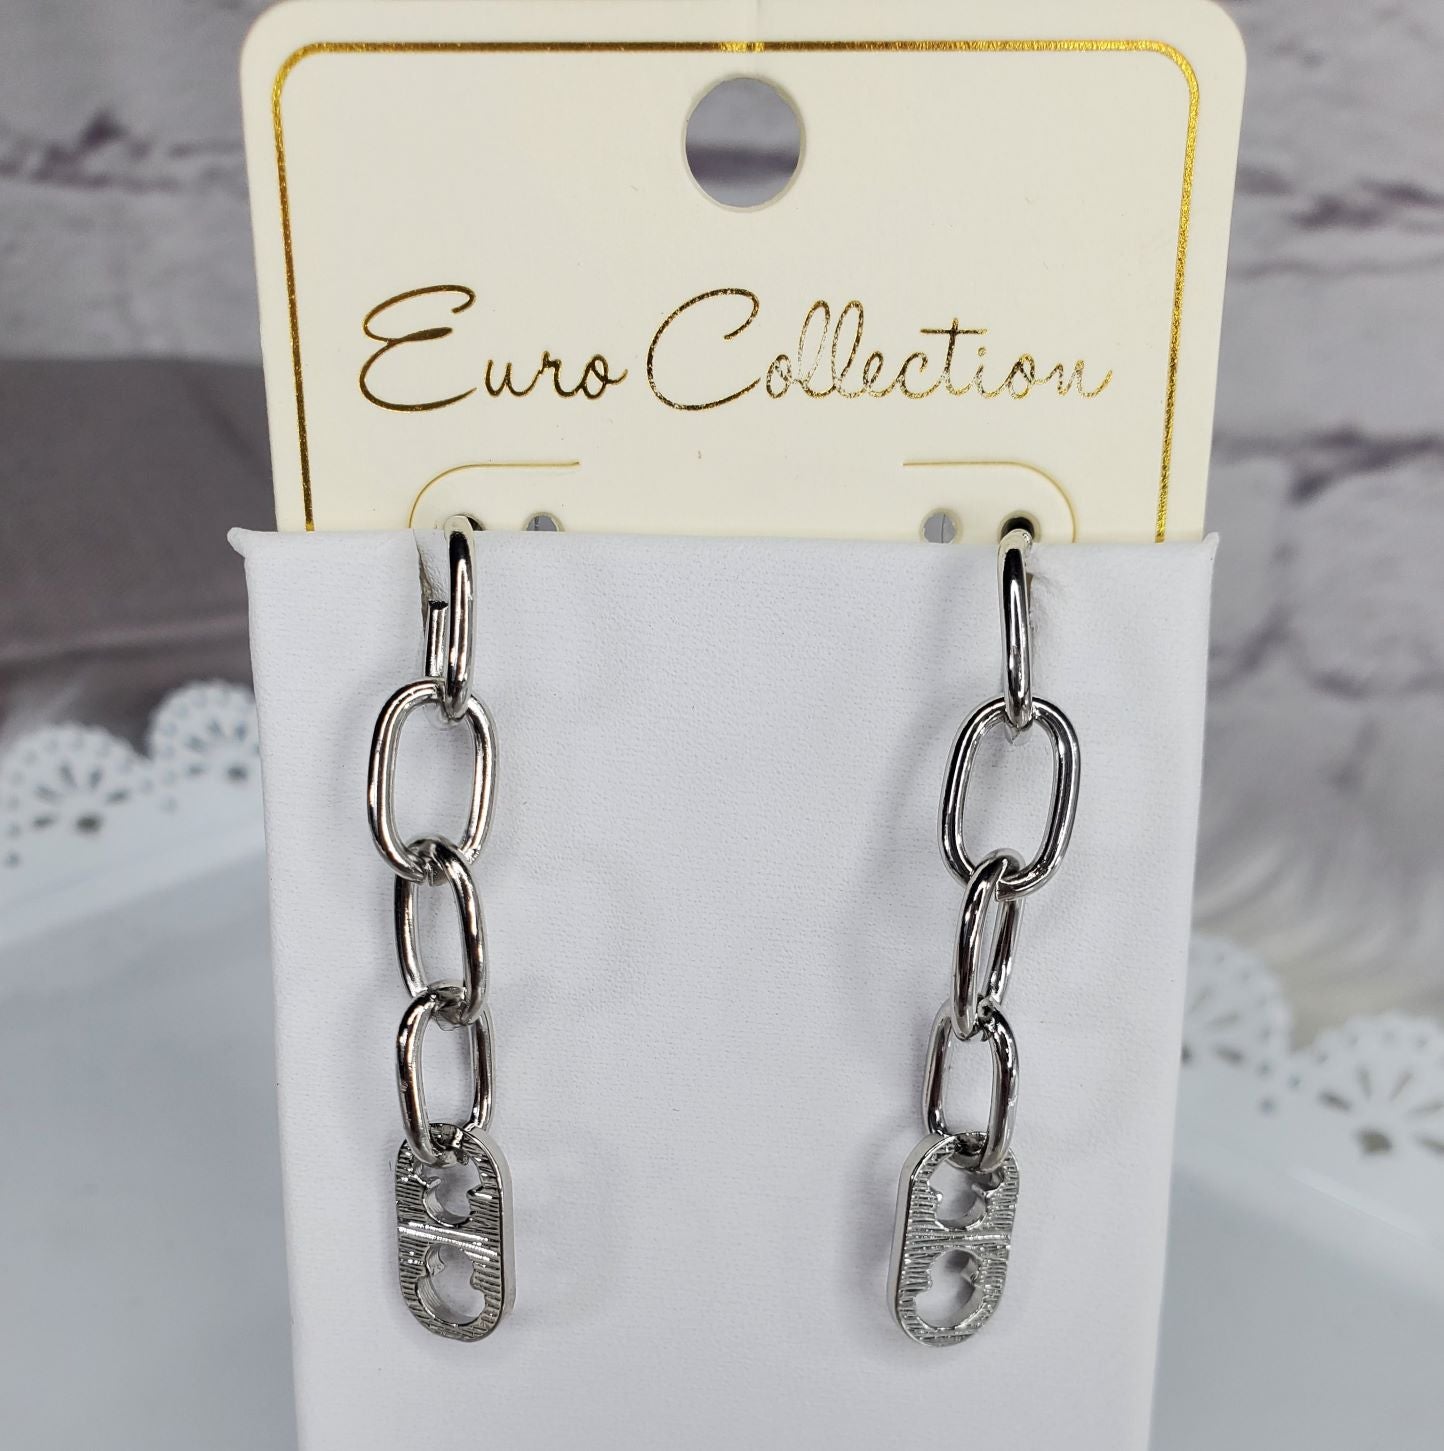 Euro Collection 4-link chain and charm earrings  Ivy and Pearl Boutique   